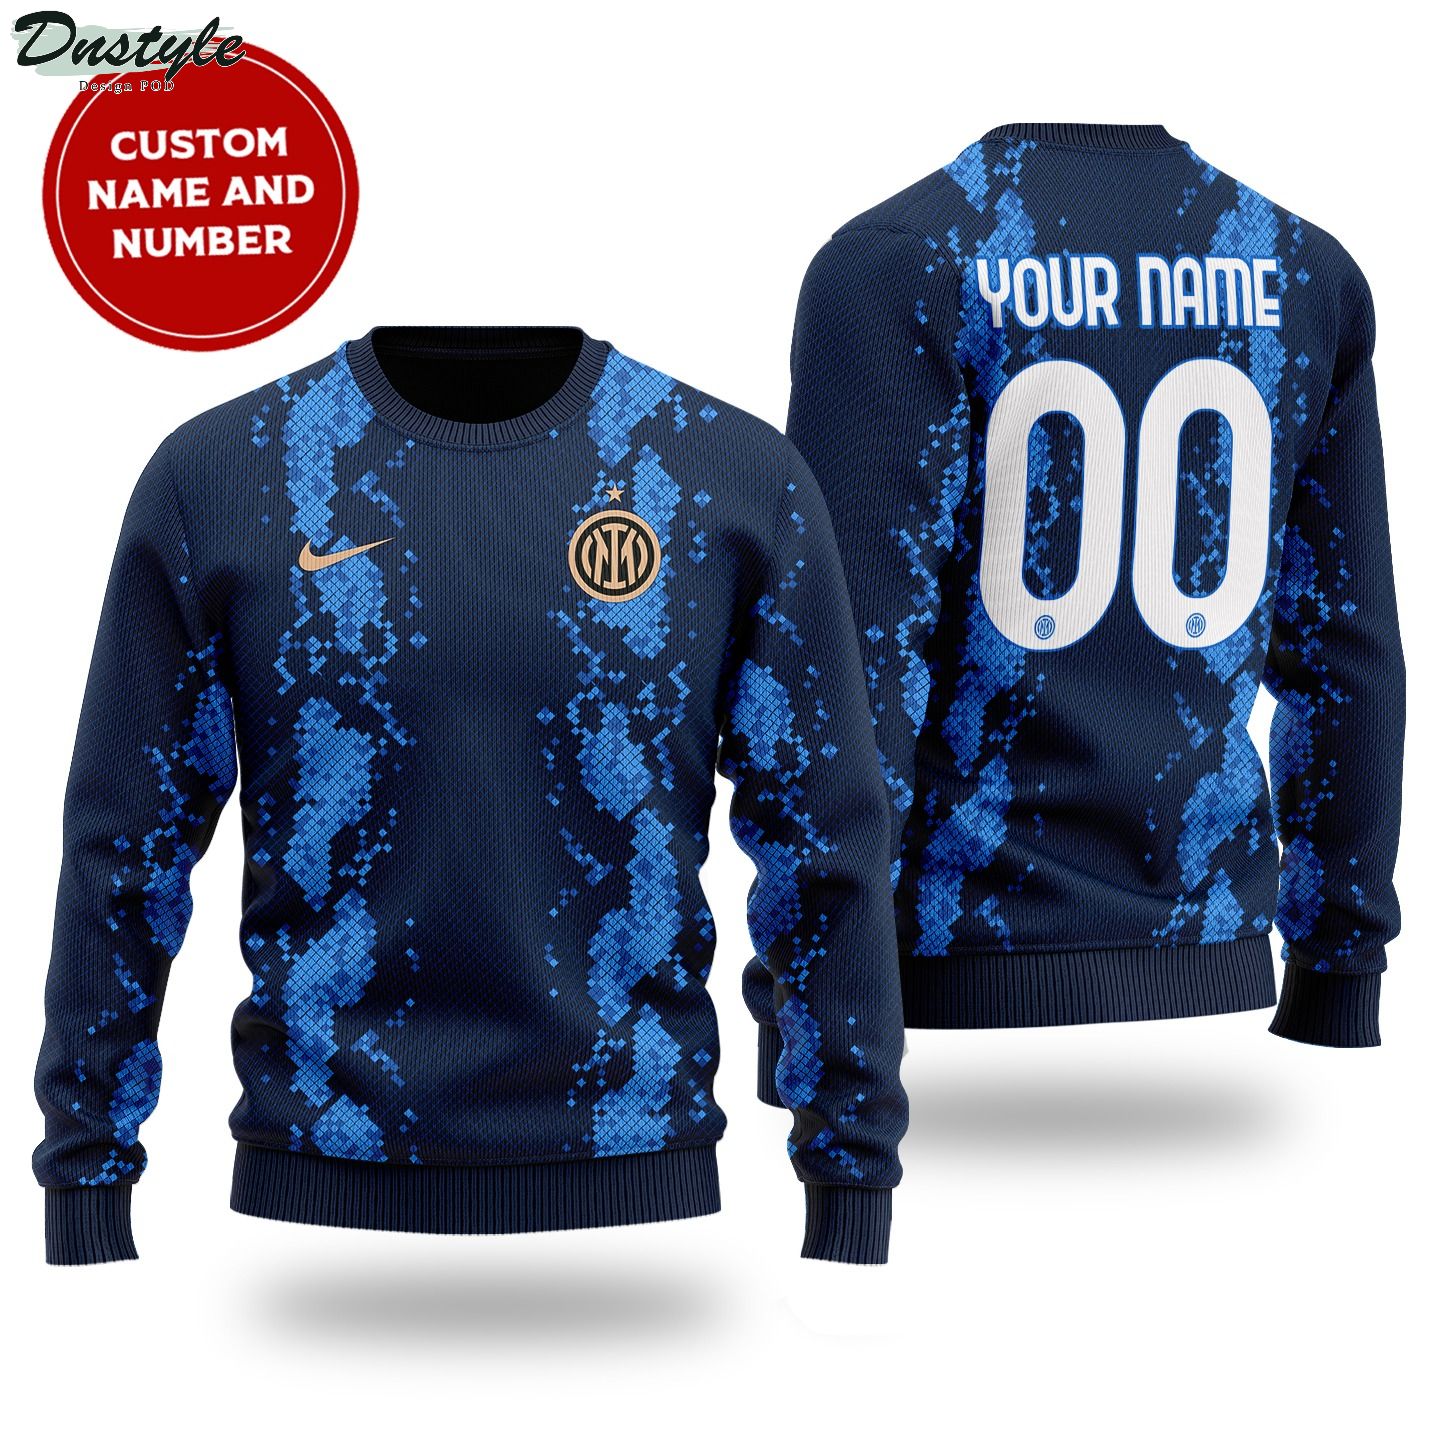 Inter Milan custom name and number ugly sweater